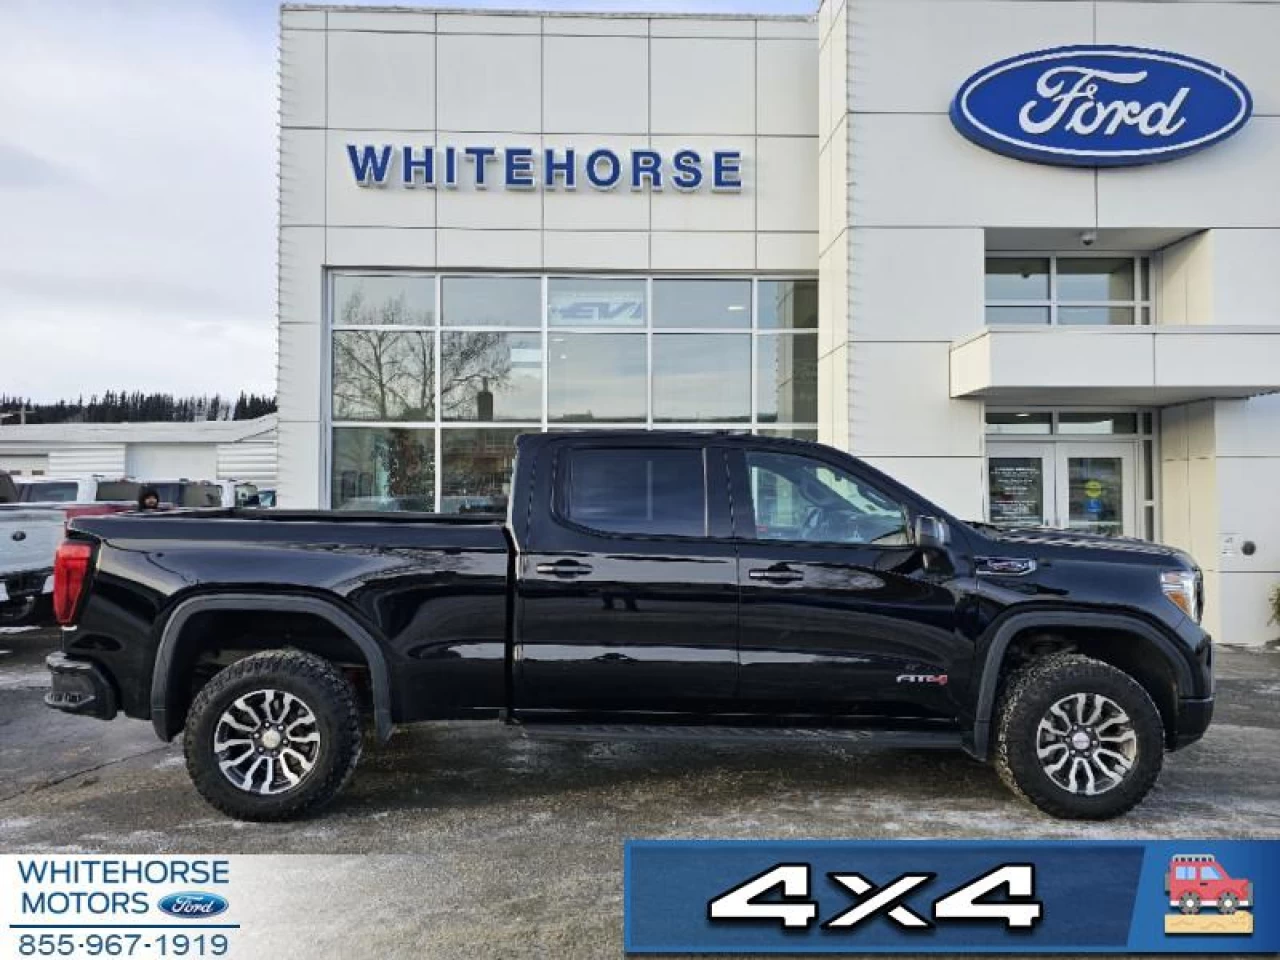 2022 GMC Sierra 1500 Limited AT4 Image principale